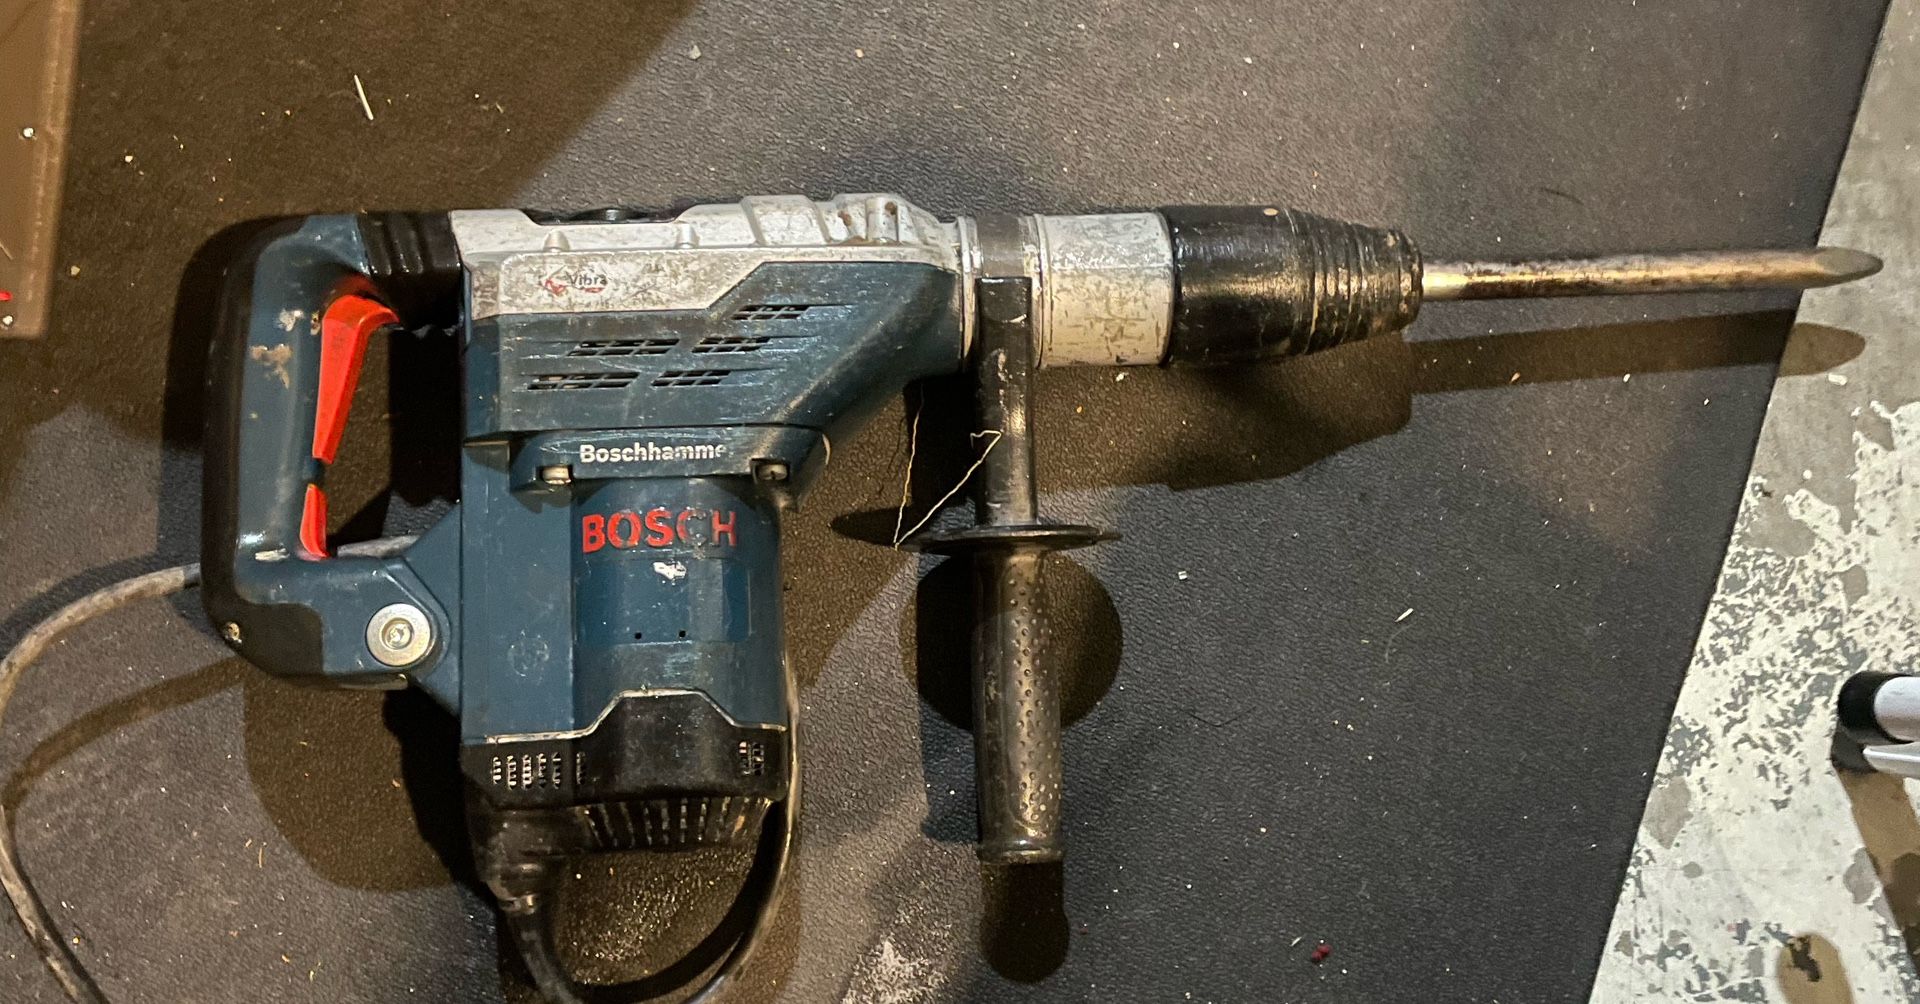 Bosch 11264EVS 13-Amp Corded 1-5/8" SDS-max Variable Speed Rotary Hammer Drill